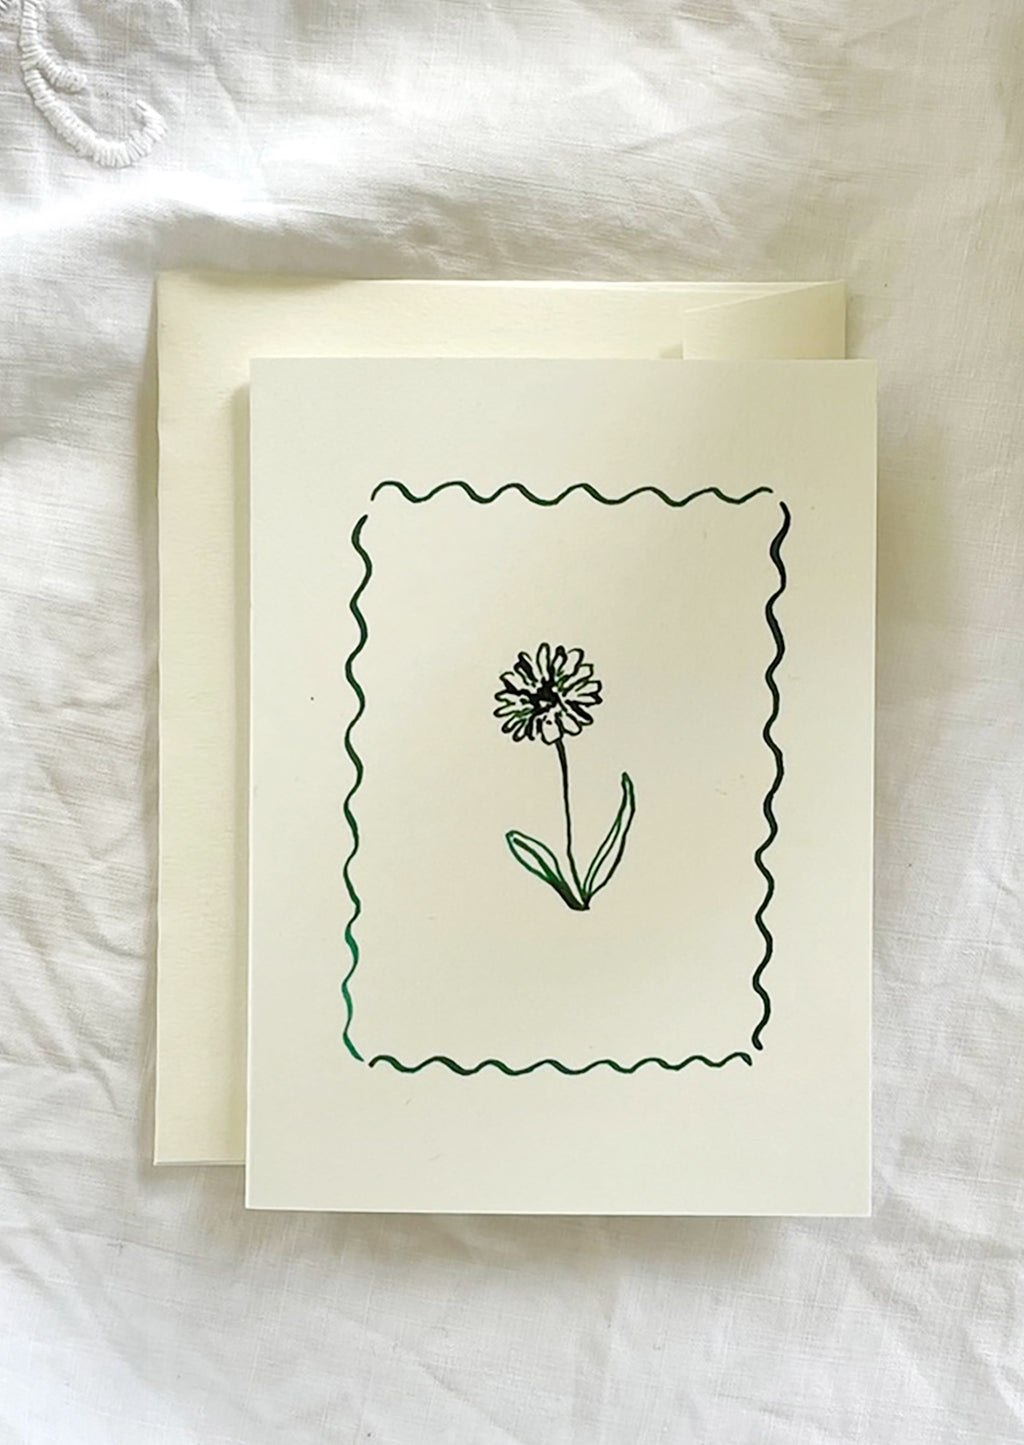 2: A card with framed floral illustration in green ink.